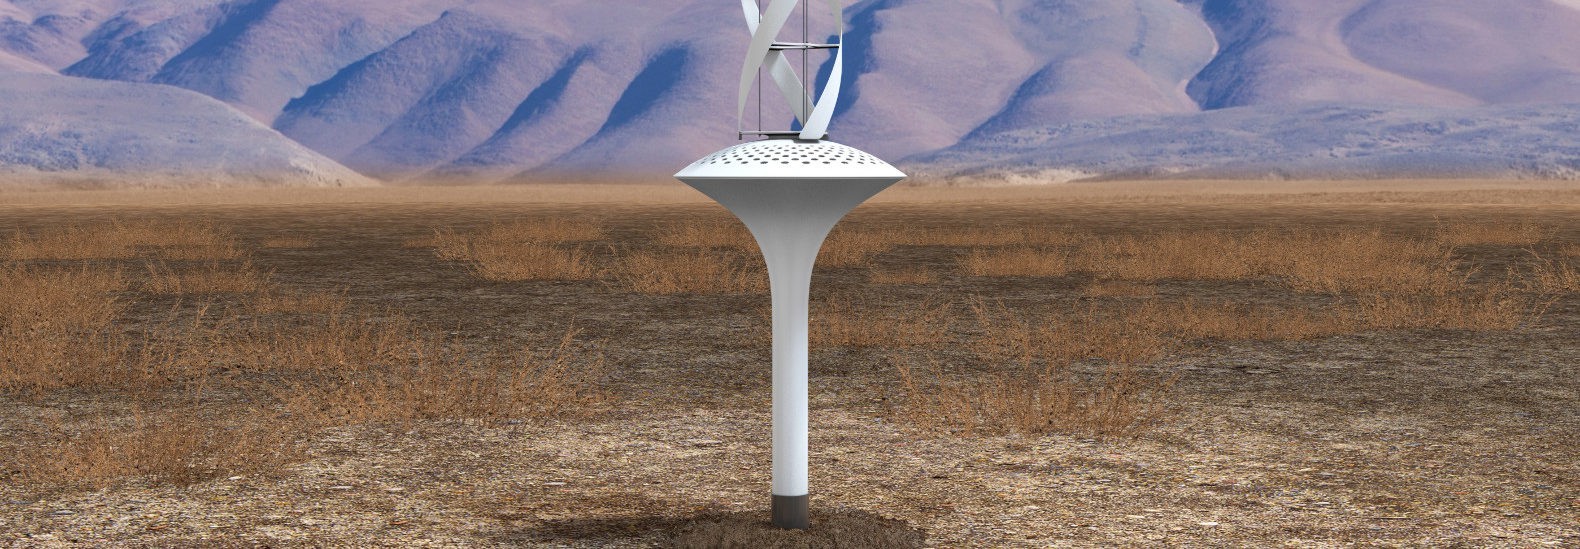 This wind powered water condenser can pull 11 gallons of clean water out of air each day for drinking